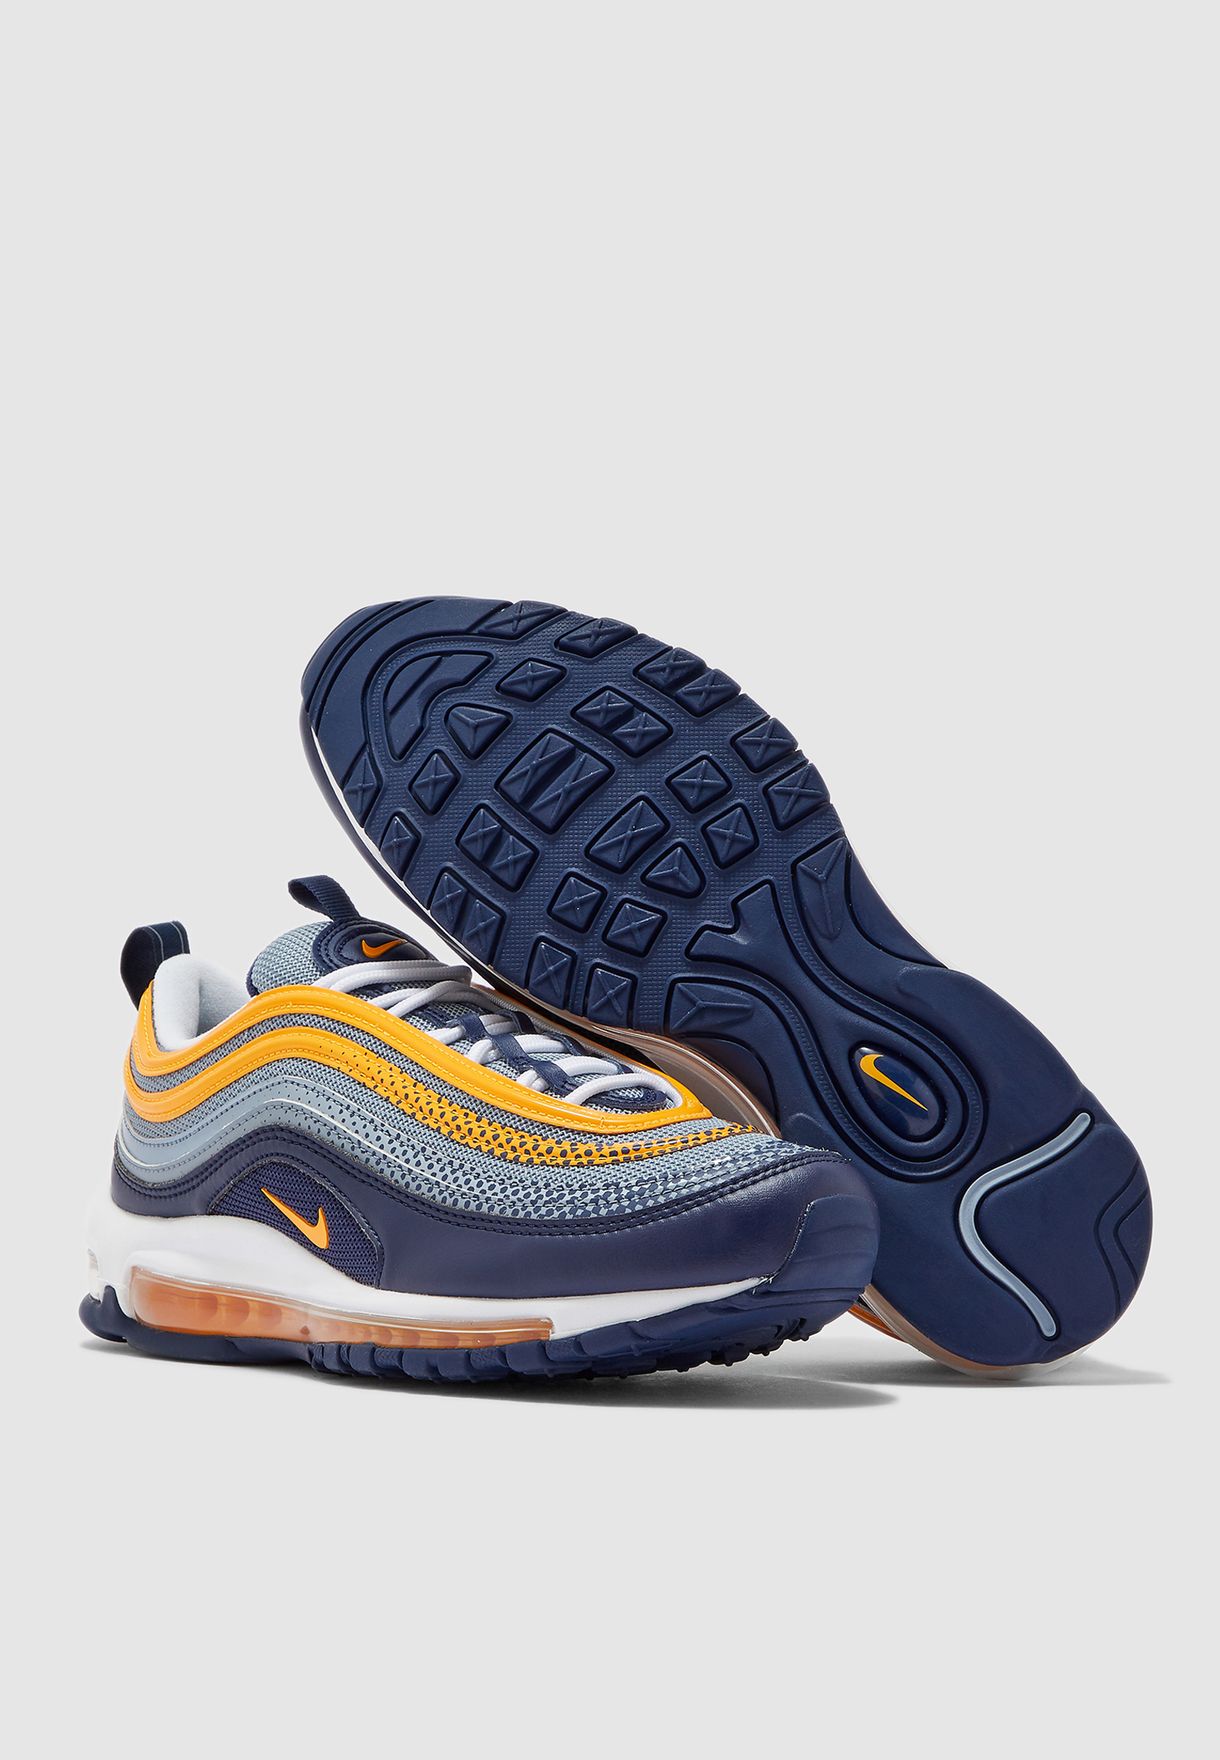 air max 97 blue and yellow